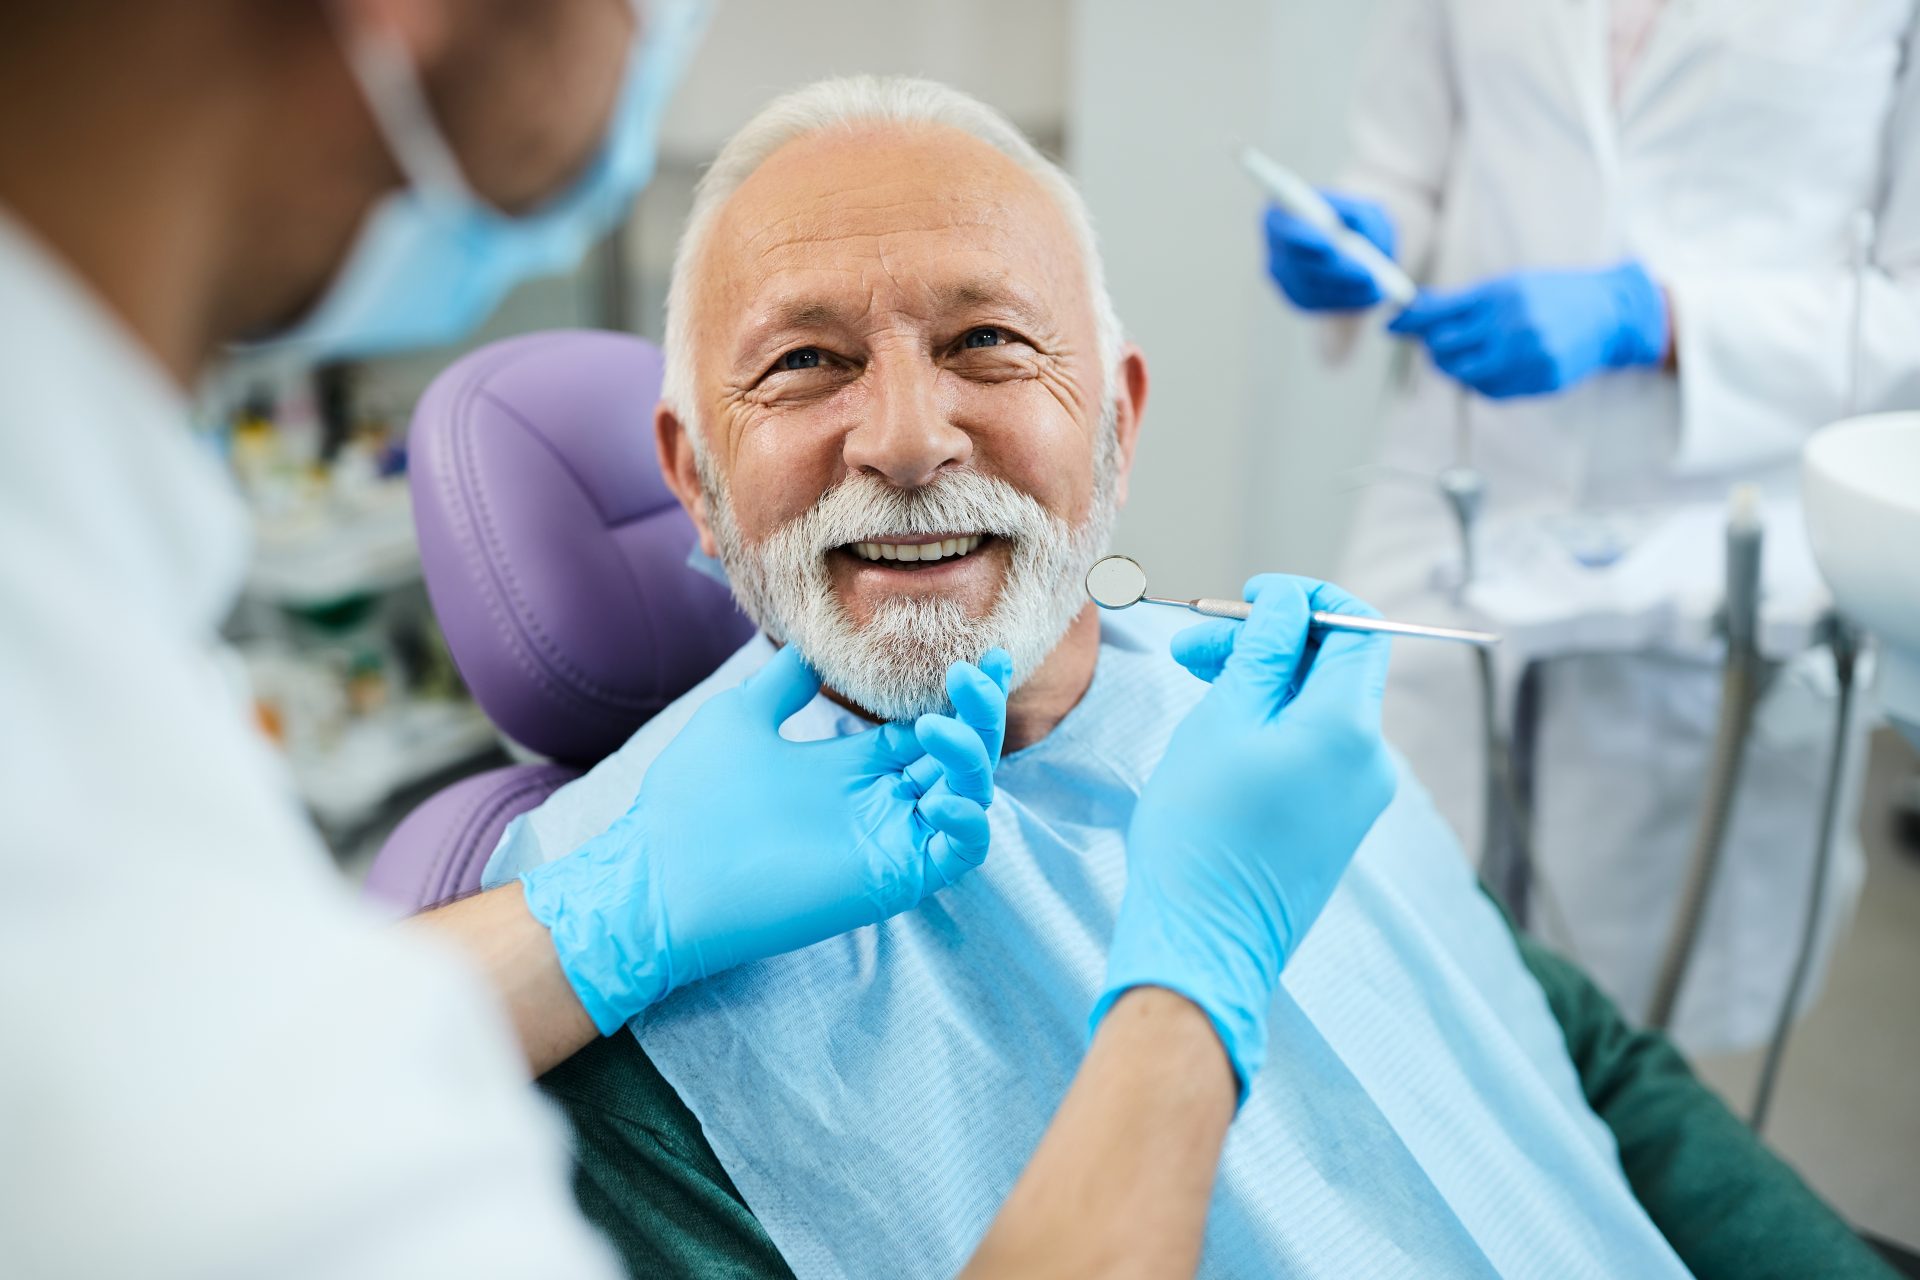 smiling man in a dental chair during a check-up